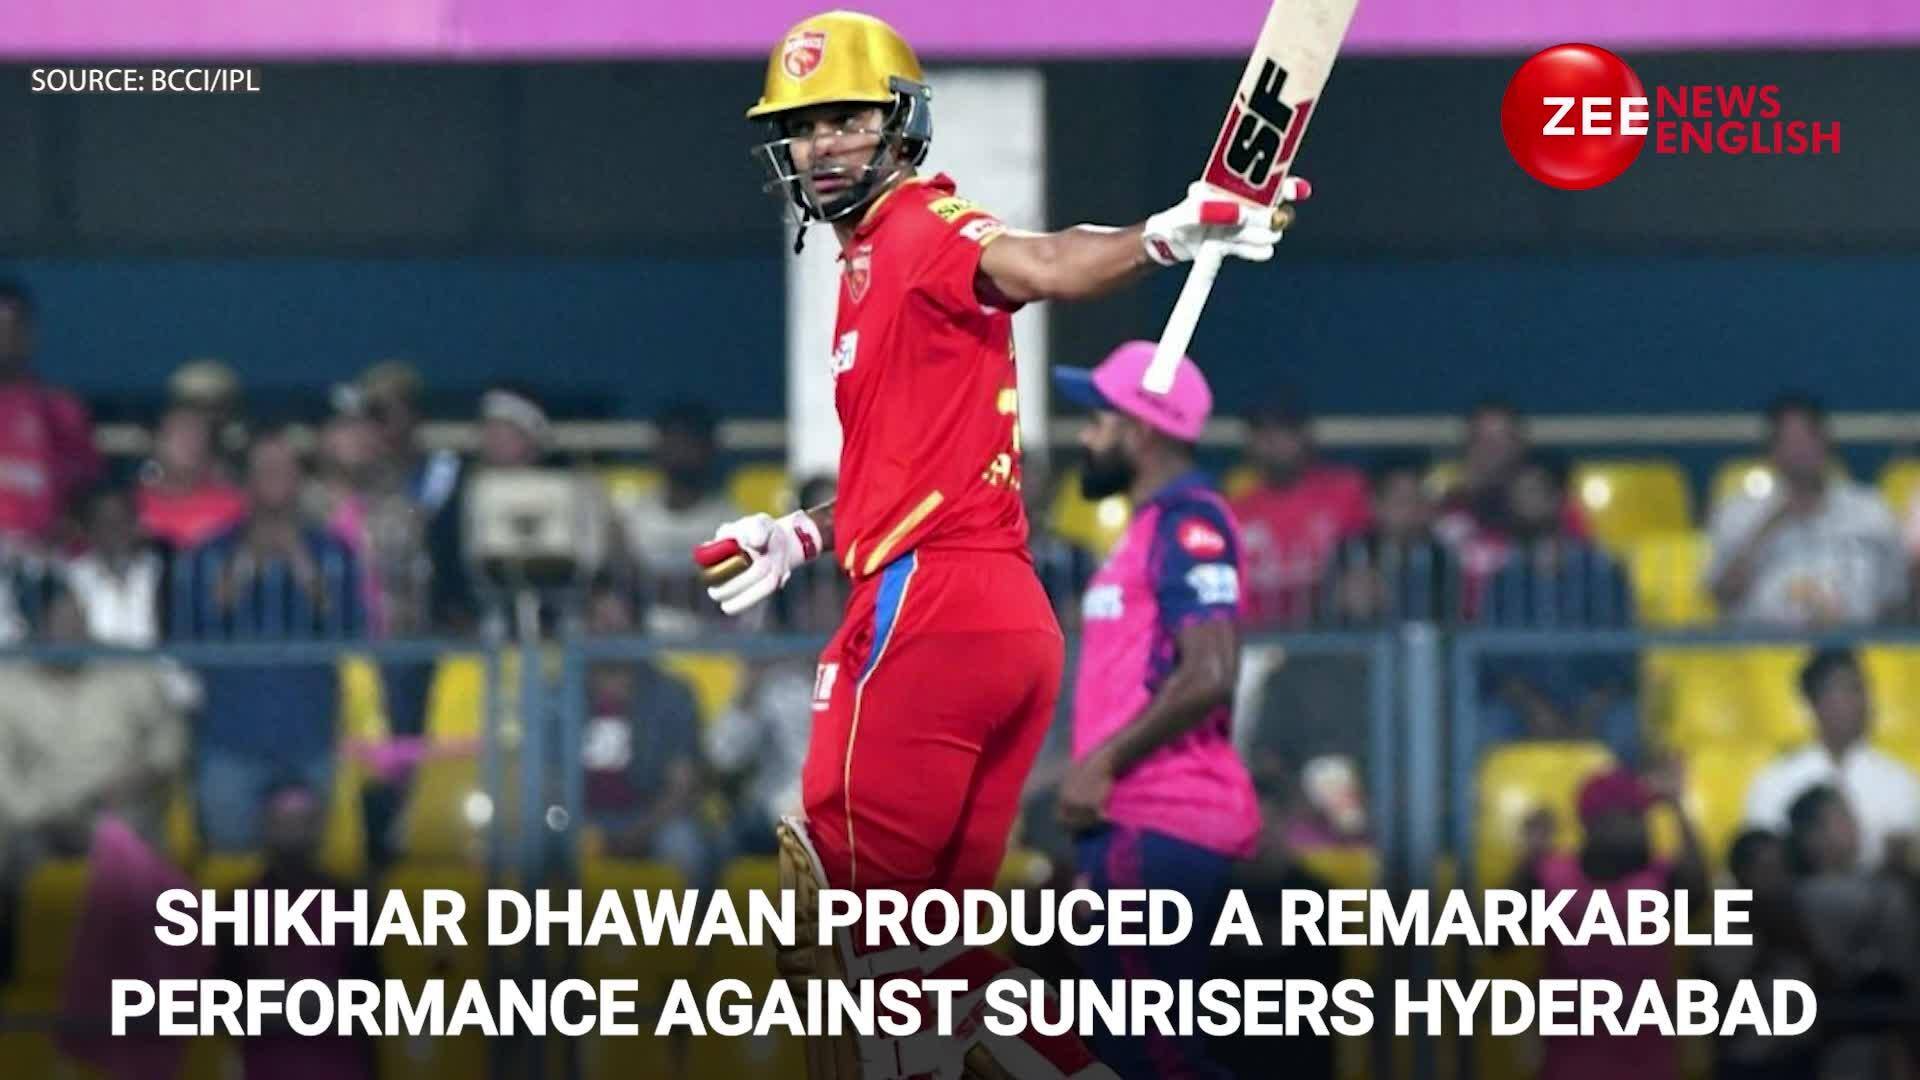 IPL 2023 Shikhar Dhawan is only the second batter in IPL history to